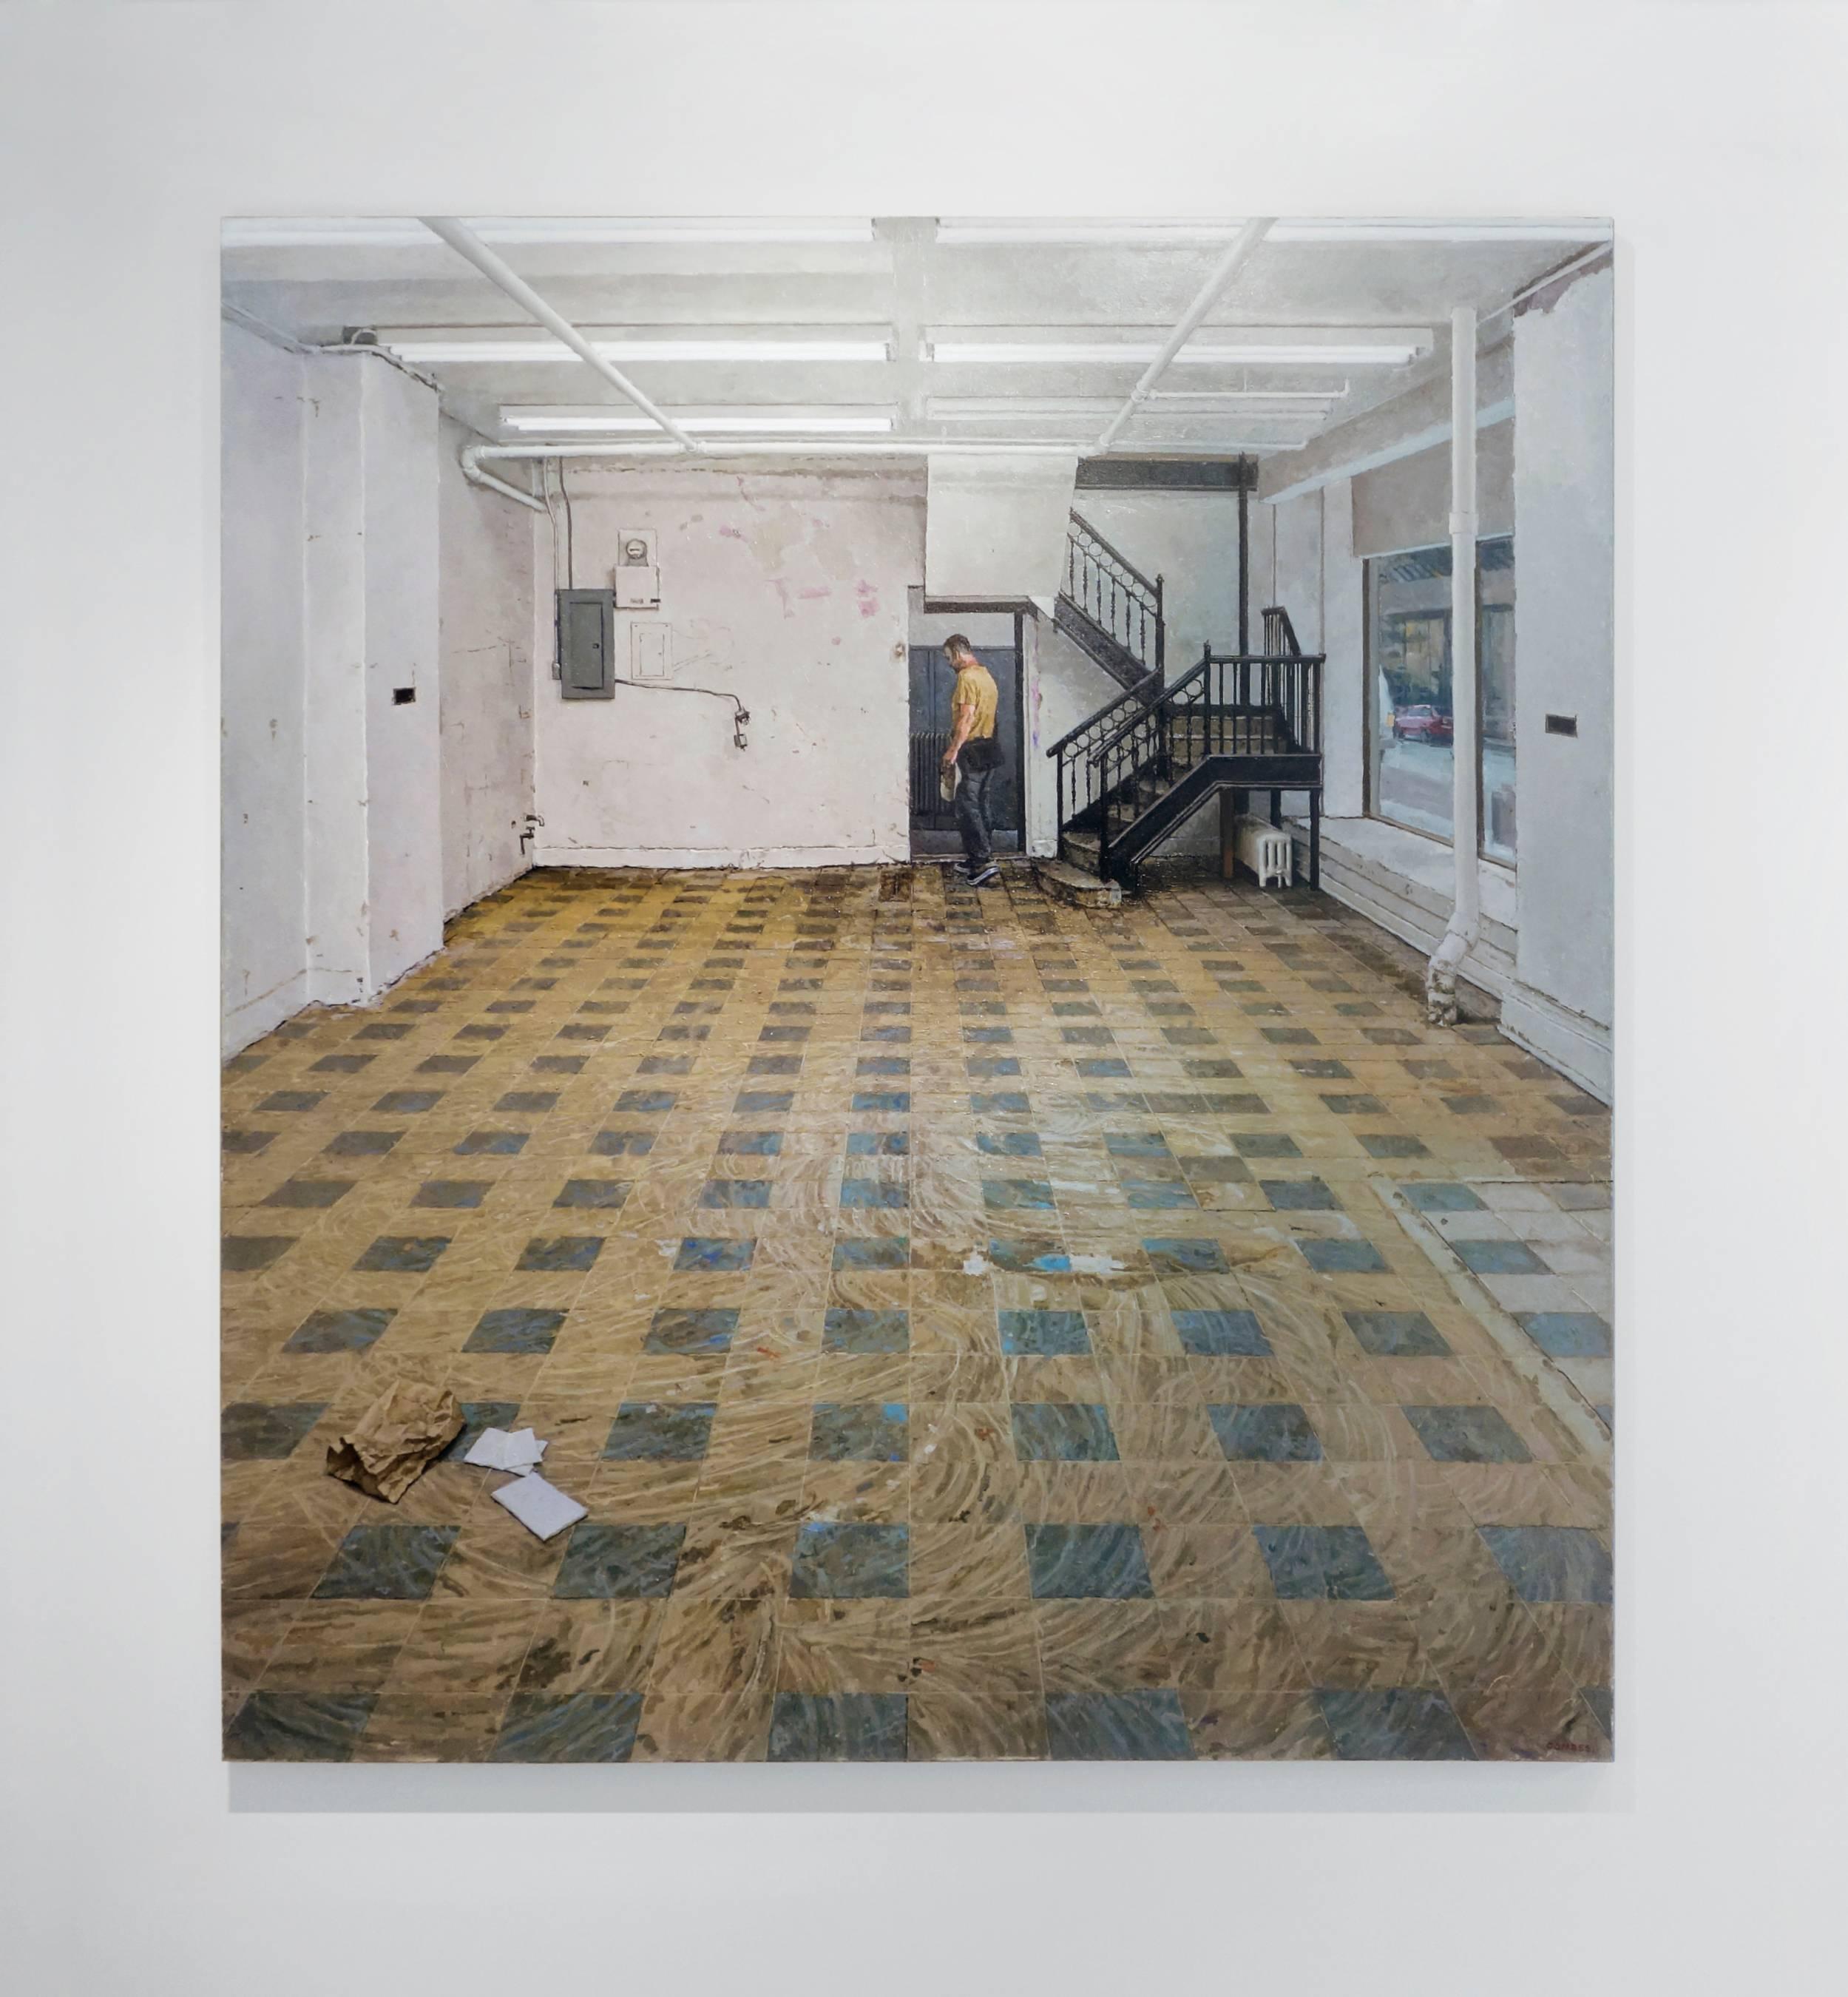 SPACE FOR RENT - Realism / Empty Room with tiled floors and white walls - Painting by Richard Combes